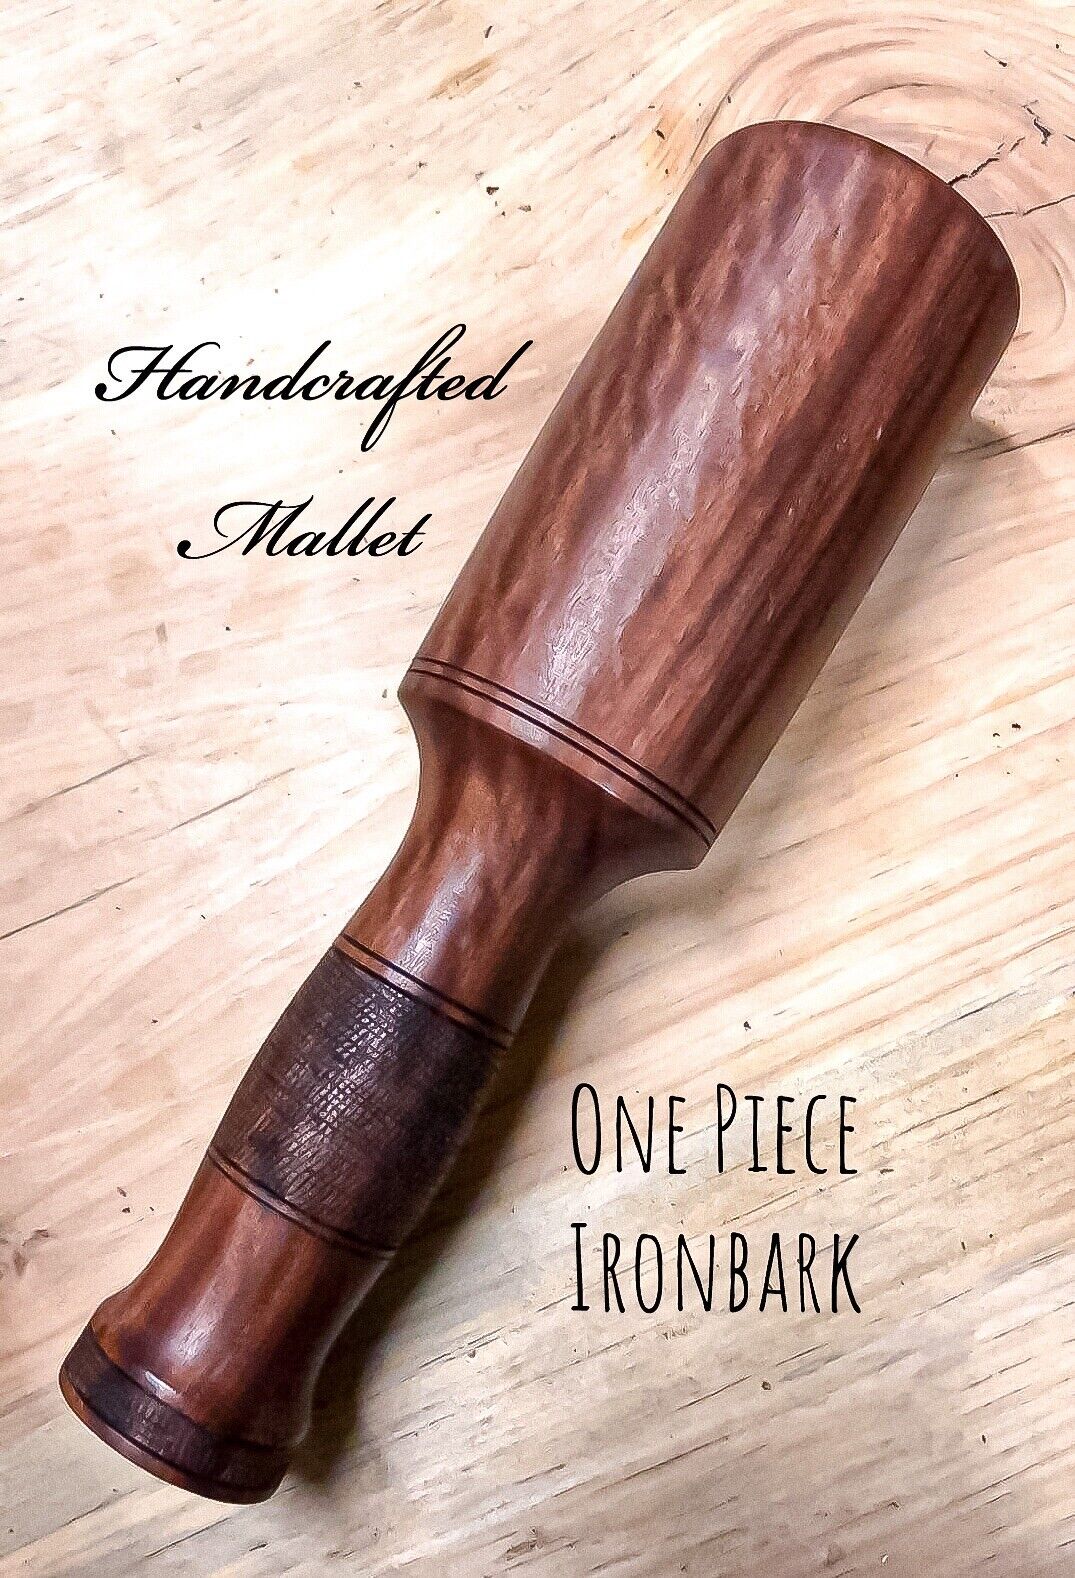 Hand Turned Wood Carving Chisel Mallet Hammer 700g Red Gum  Or Ironbark Timber